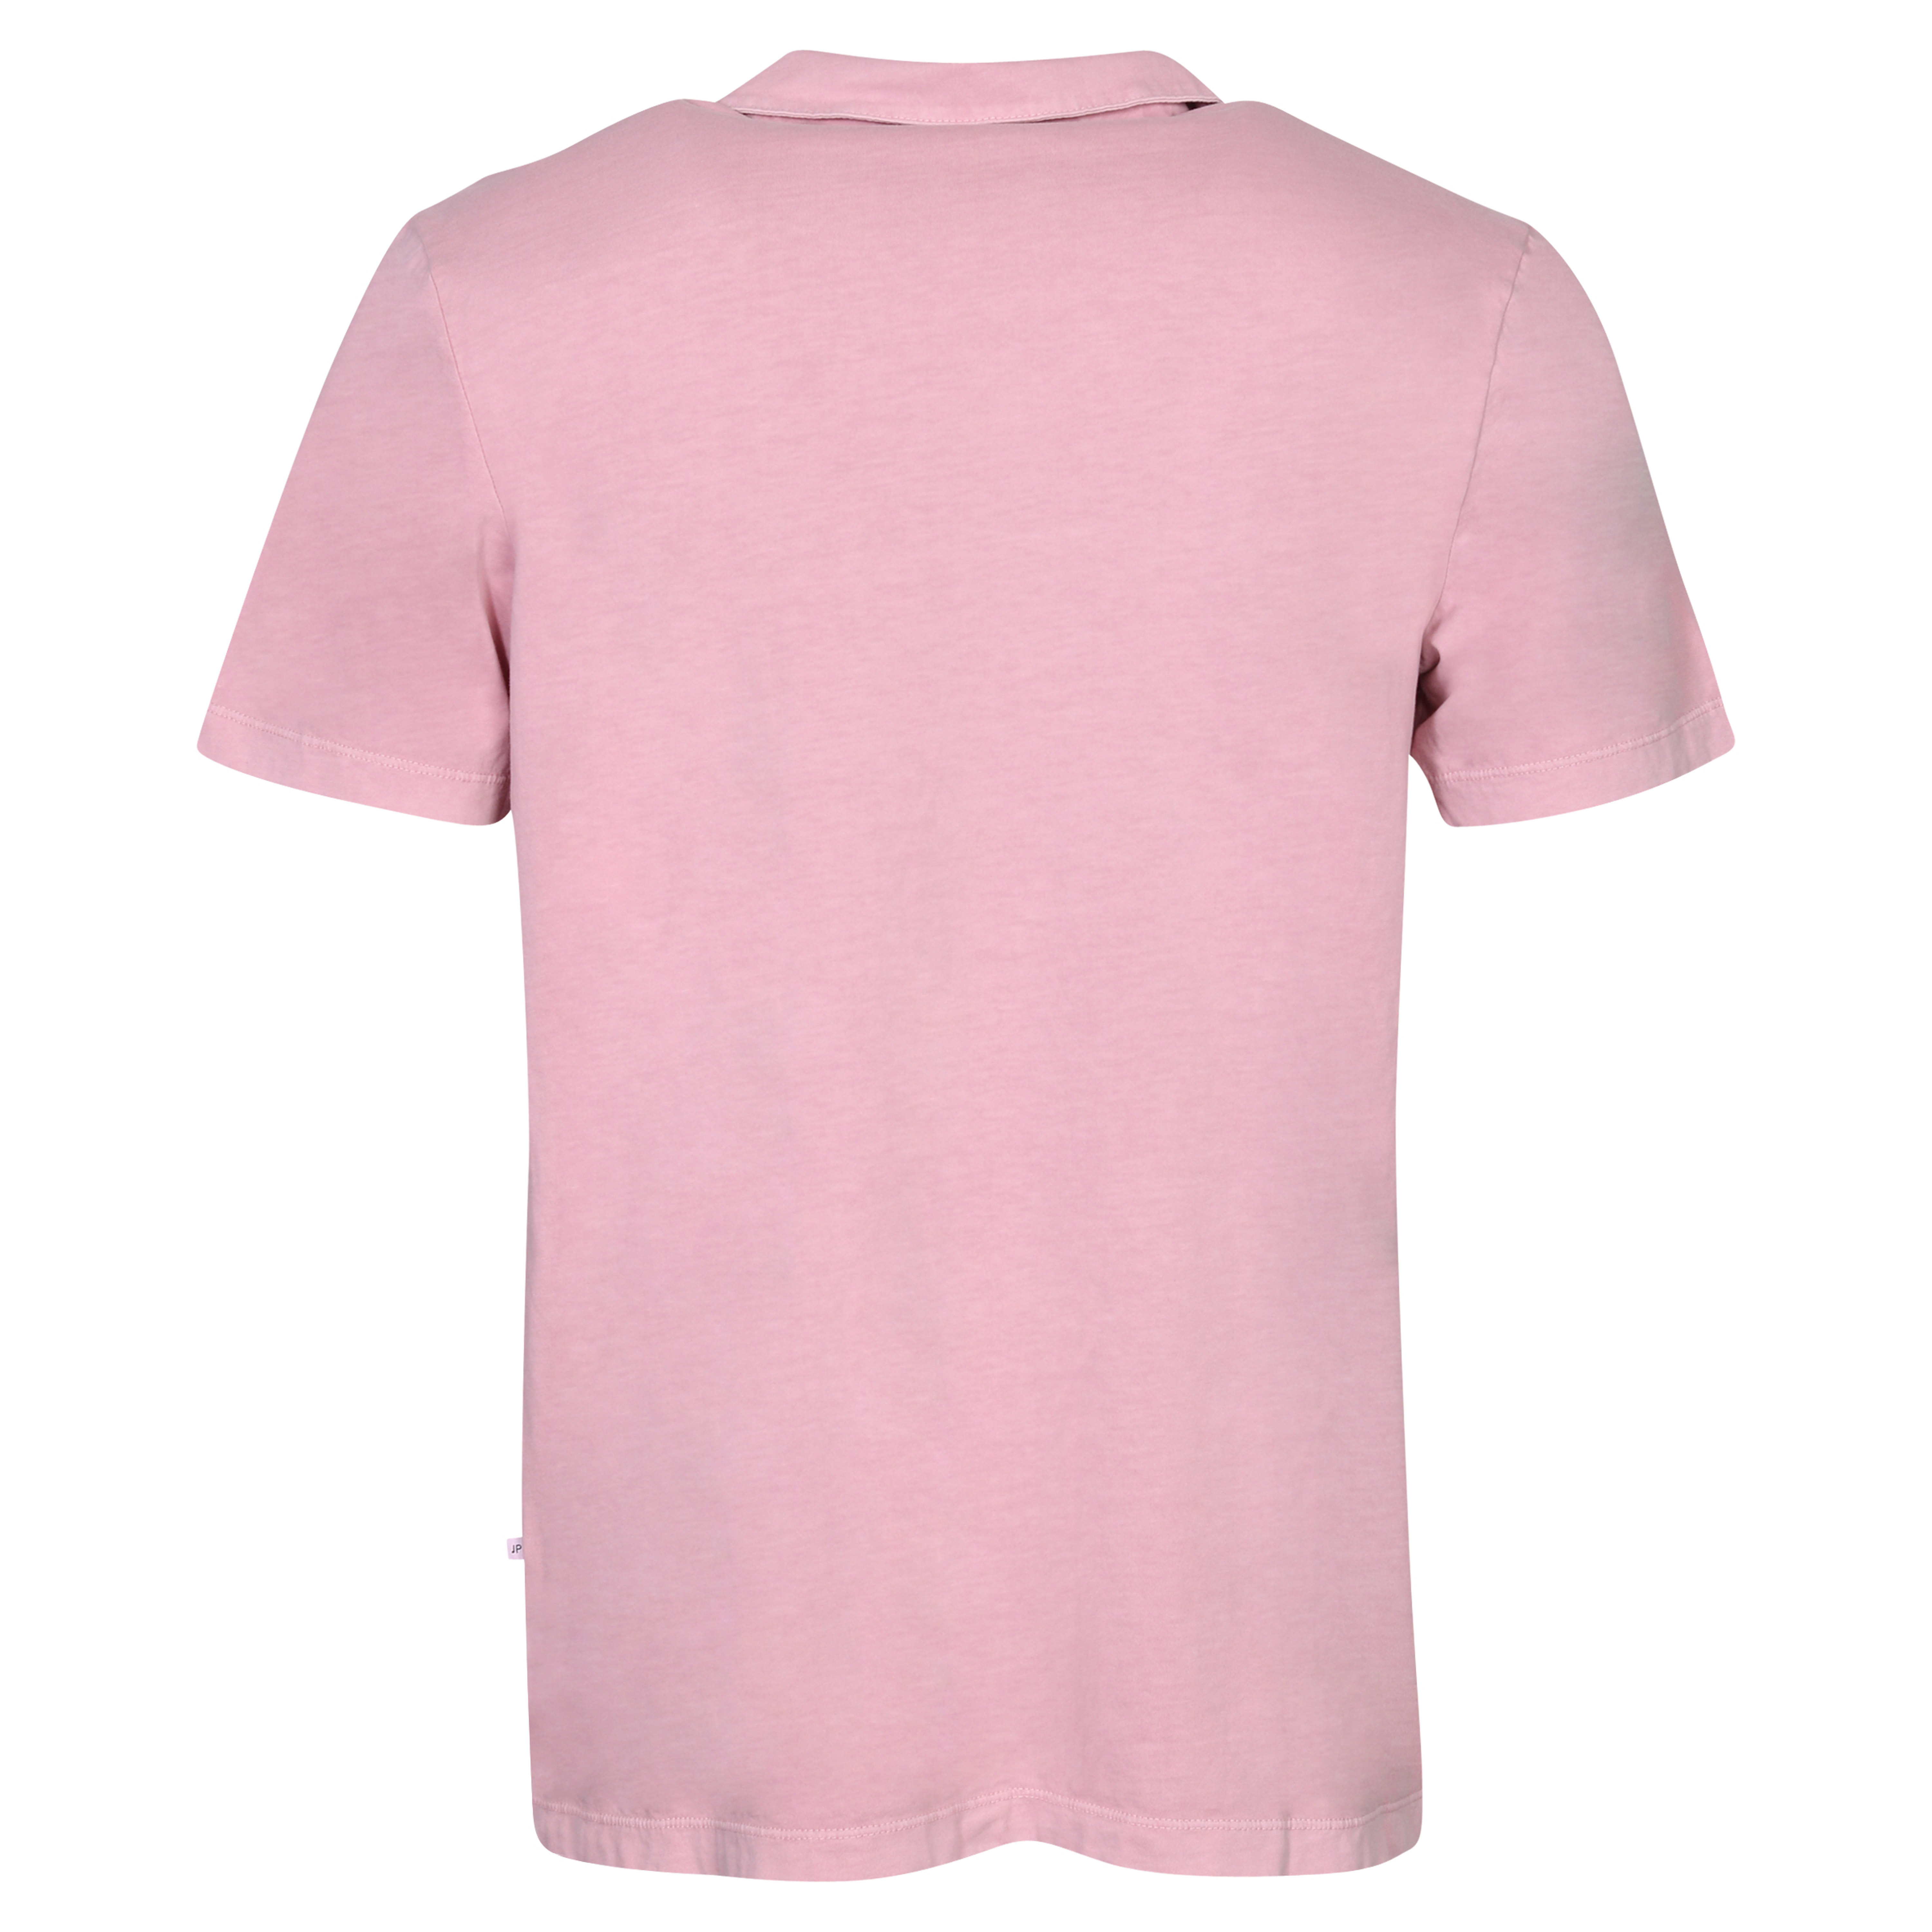 James Perse Standard Polo Antique Rose